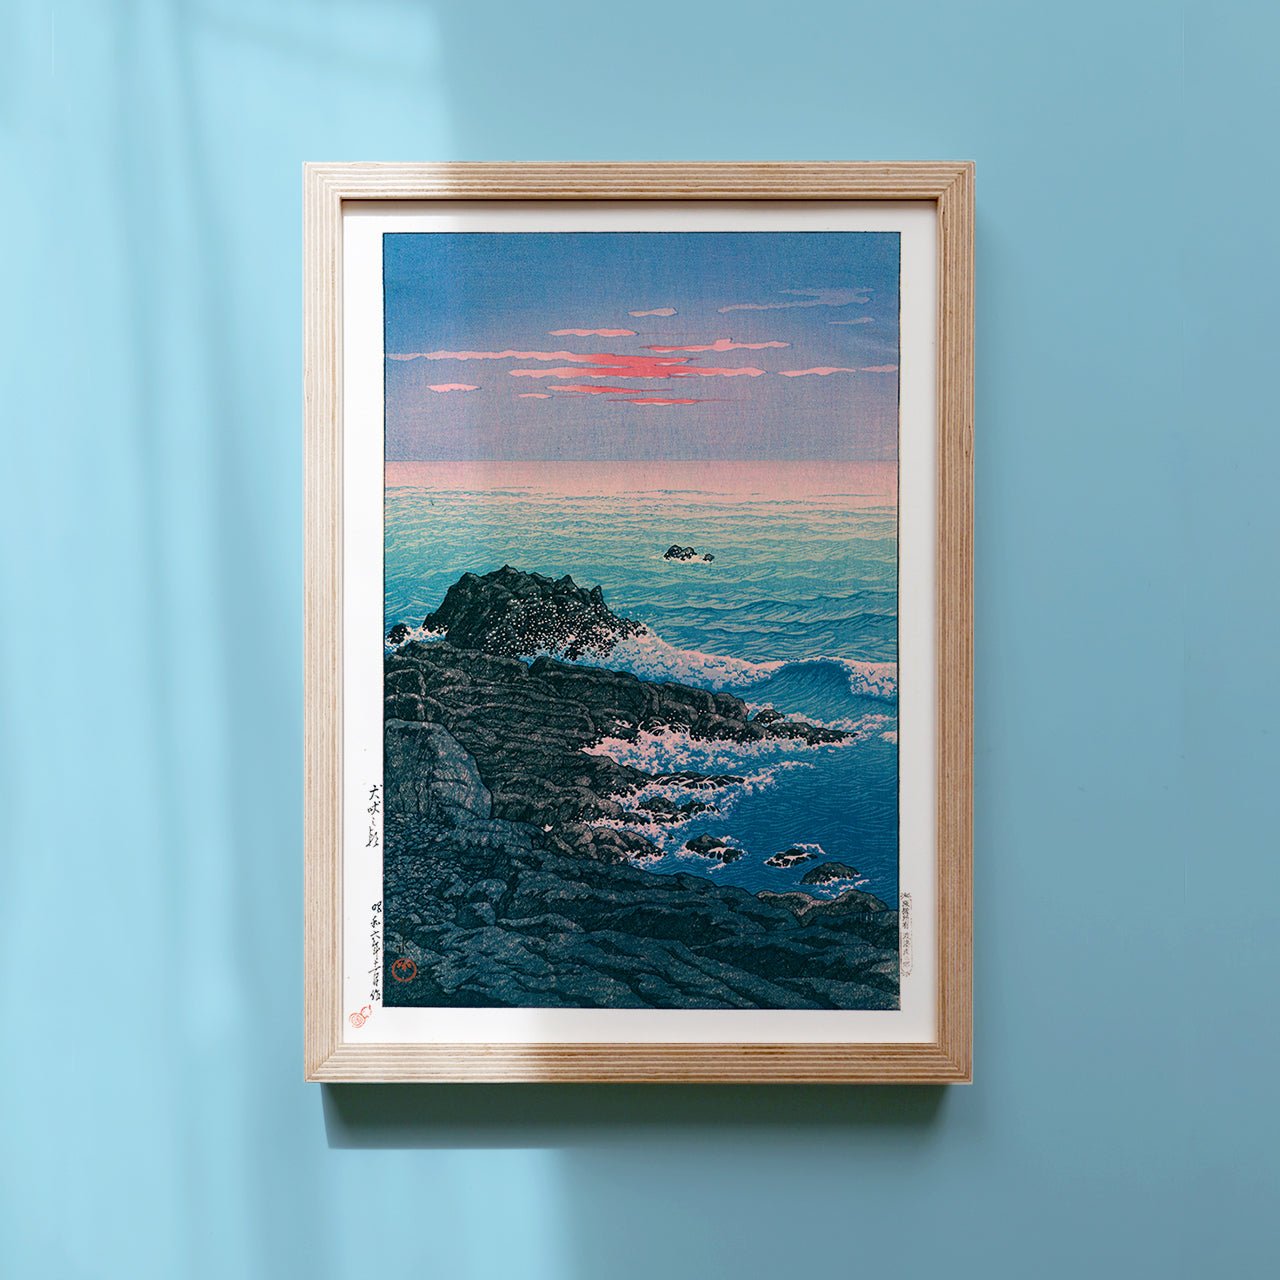 Framed  Japanese Art Poster by Kawase Hasui capturing the ocean and rocks at dawn, with pink sky and crashing whitecaps.